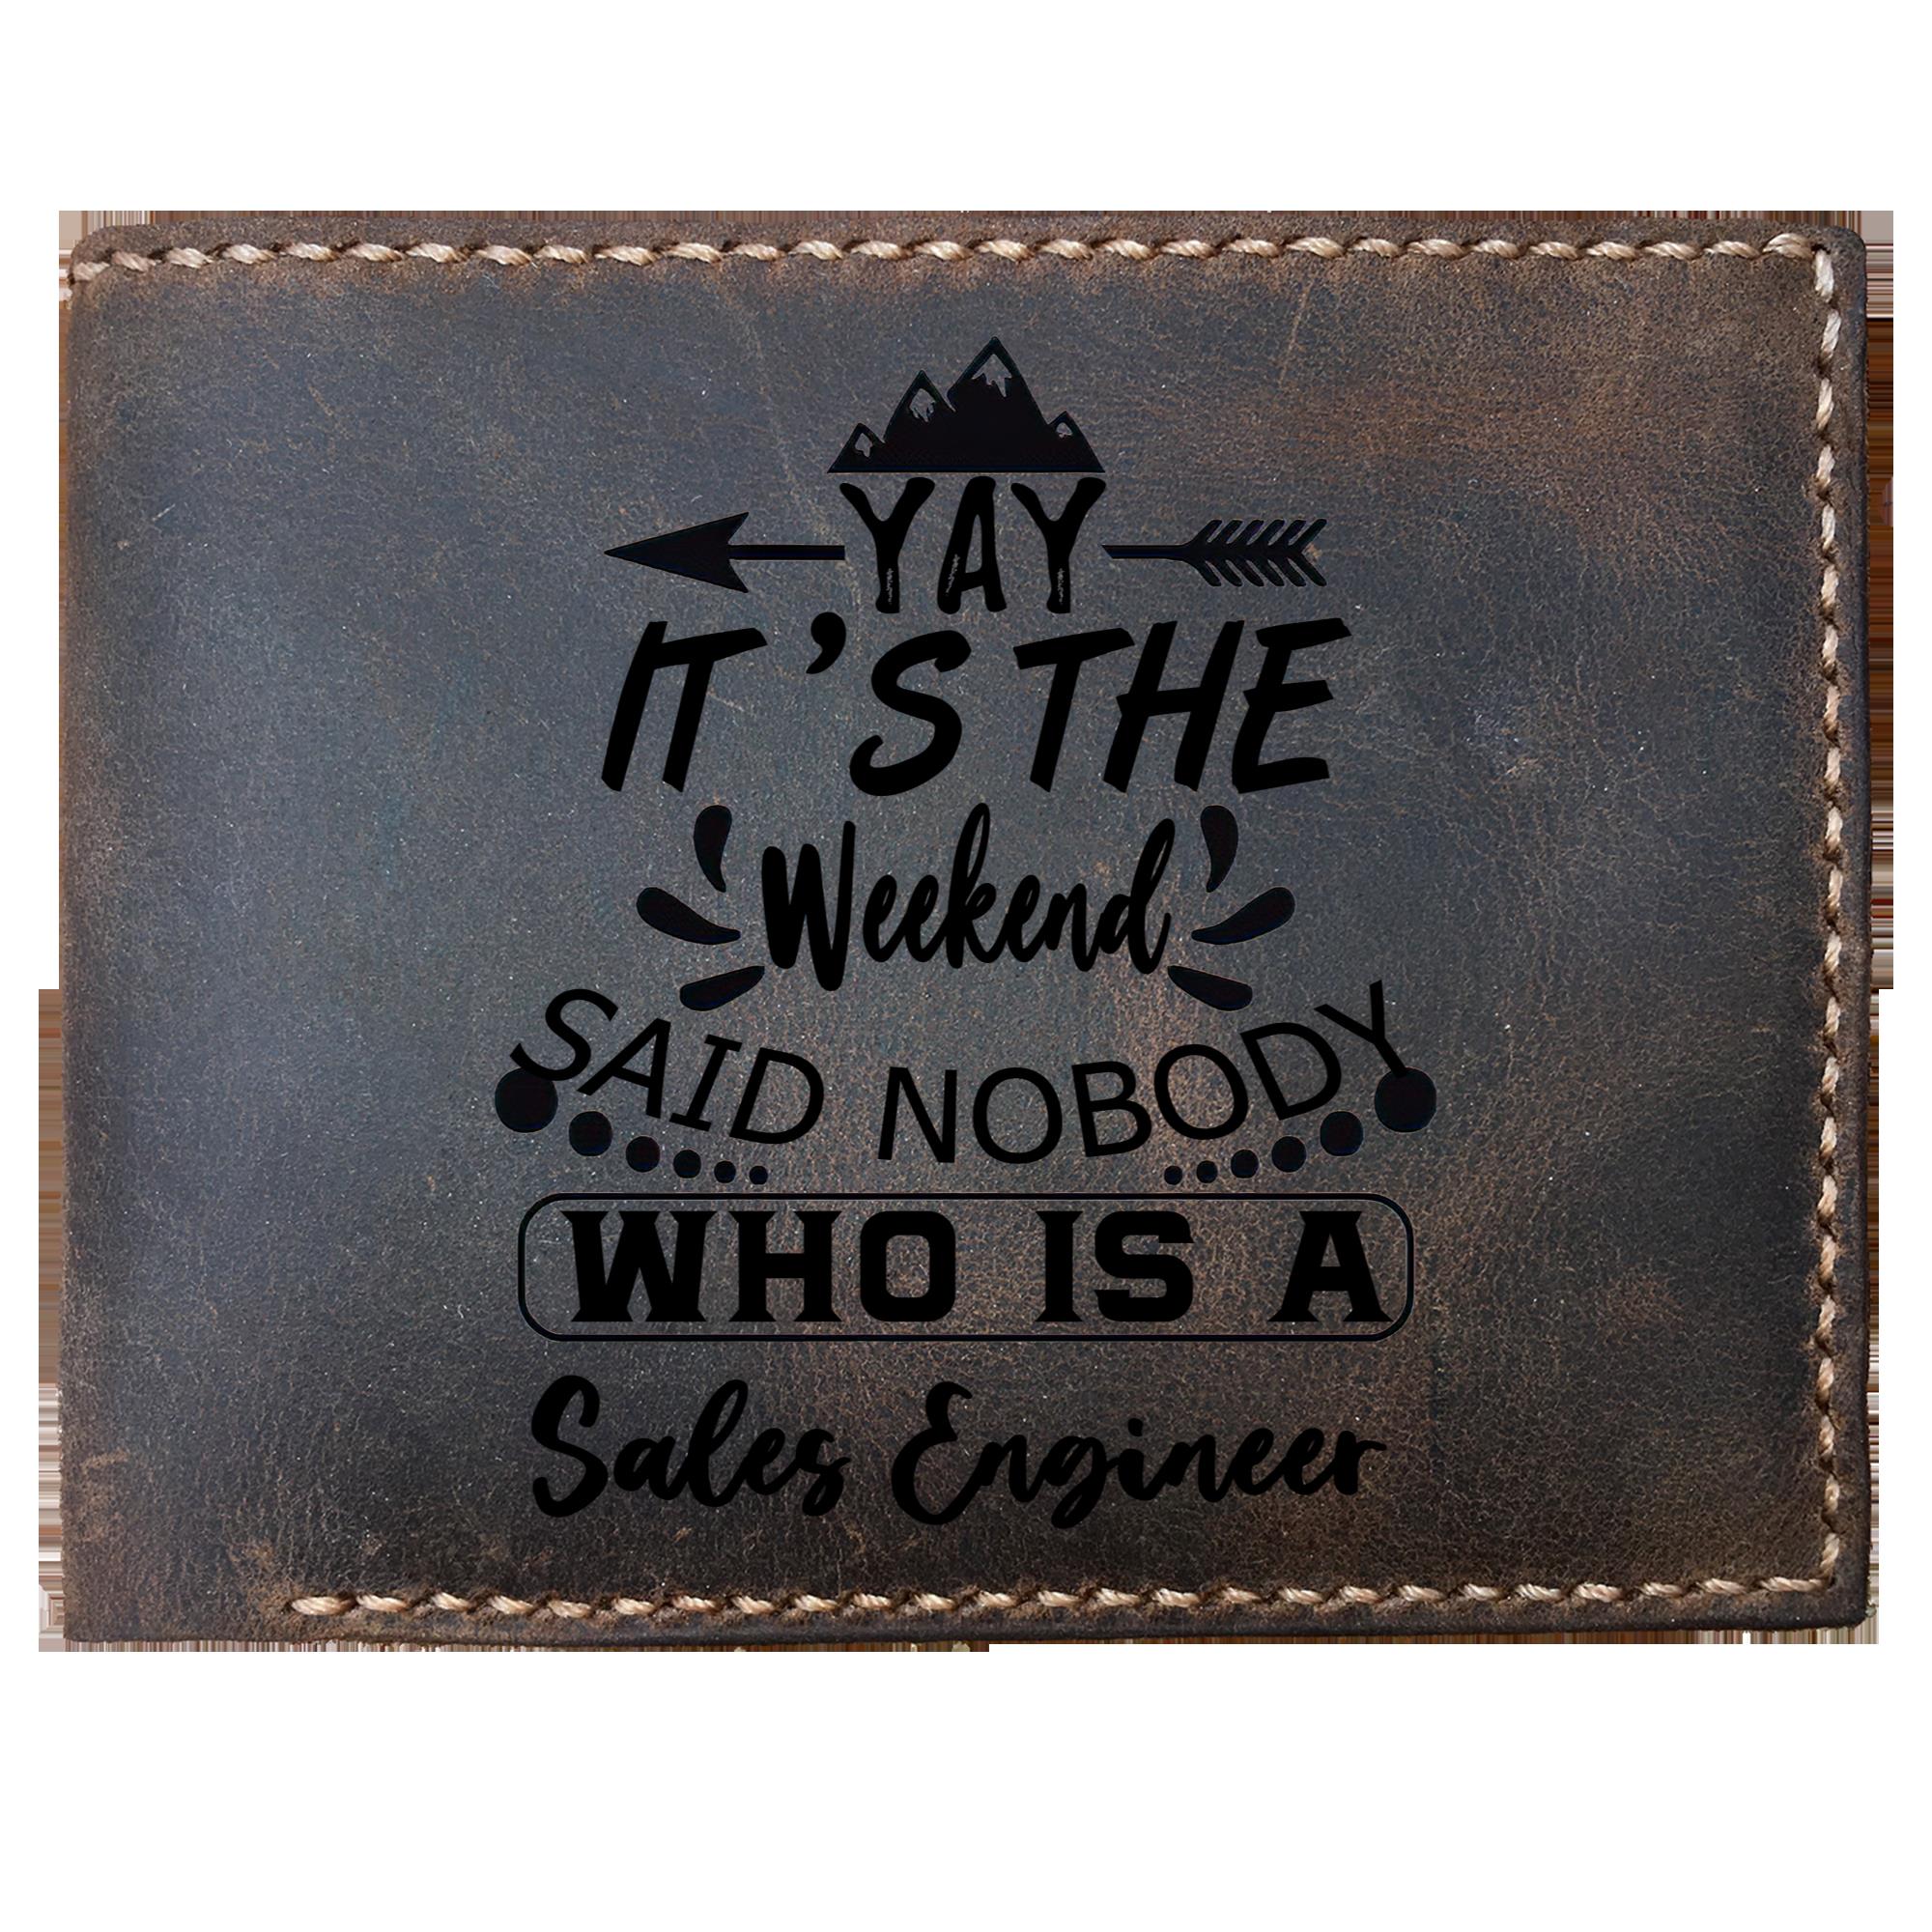 Skitongifts Funny Custom Laser Engraved Bifold Leather Wallet For Men, It's The Weekend Said Nobody Who Is A Sales Engineer, Father's Day Gifts